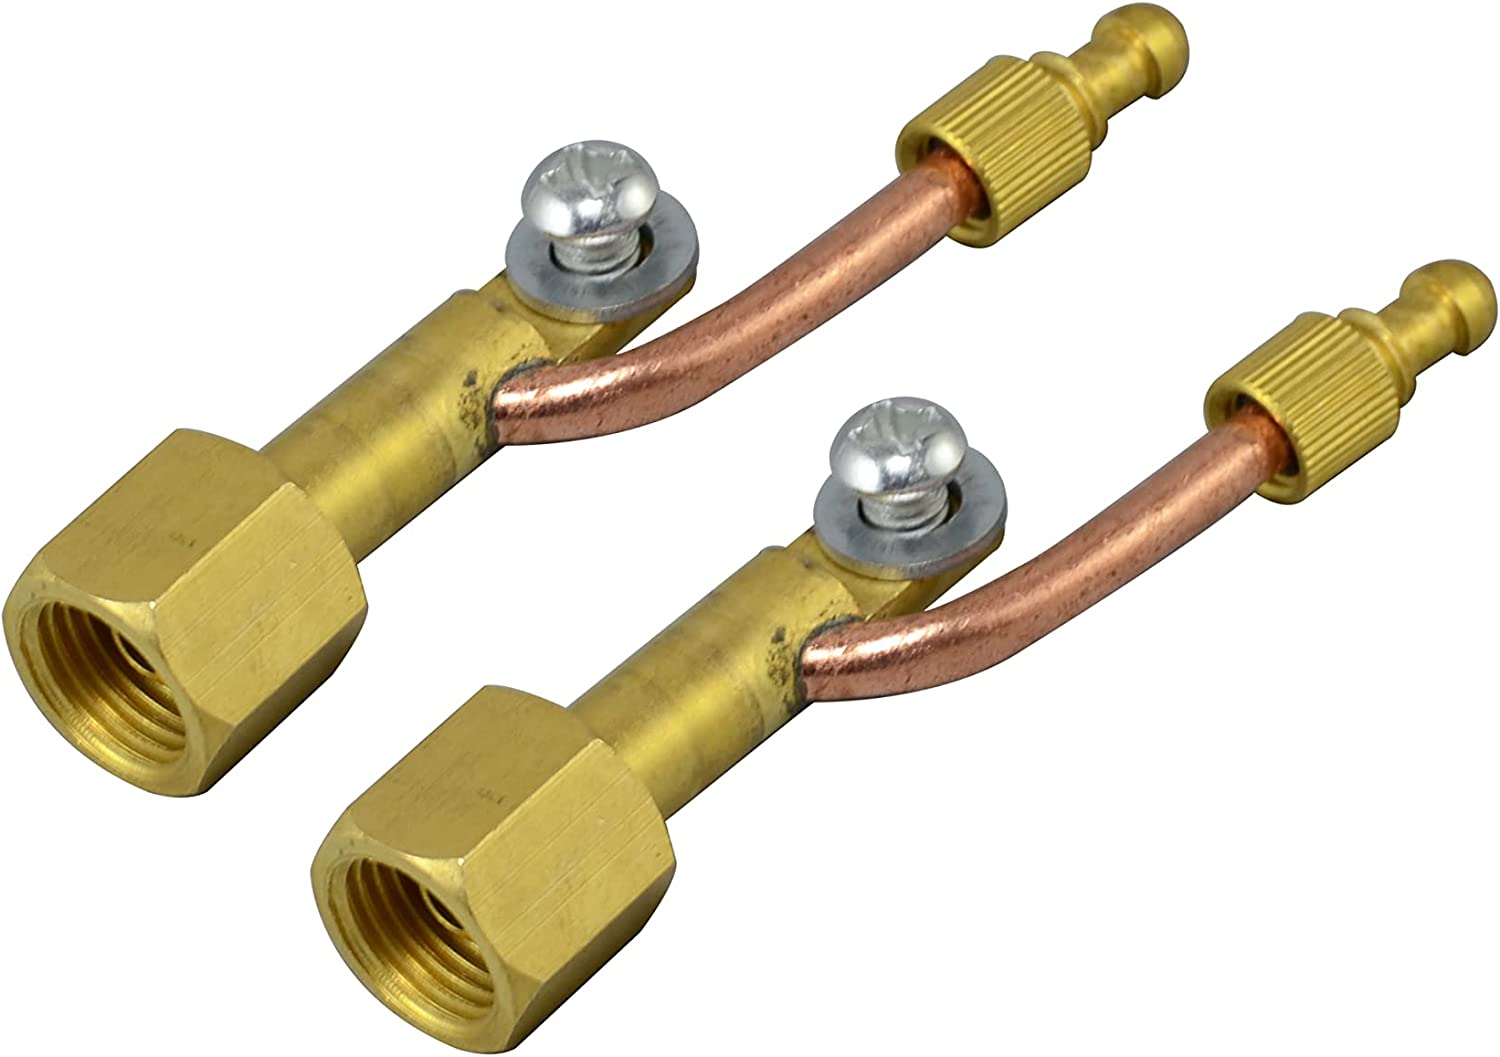 Cables and Gas (Water) Separate Cable Connector Fitting for TIG Welding Torch (9/16" -18 WP18 2pk)